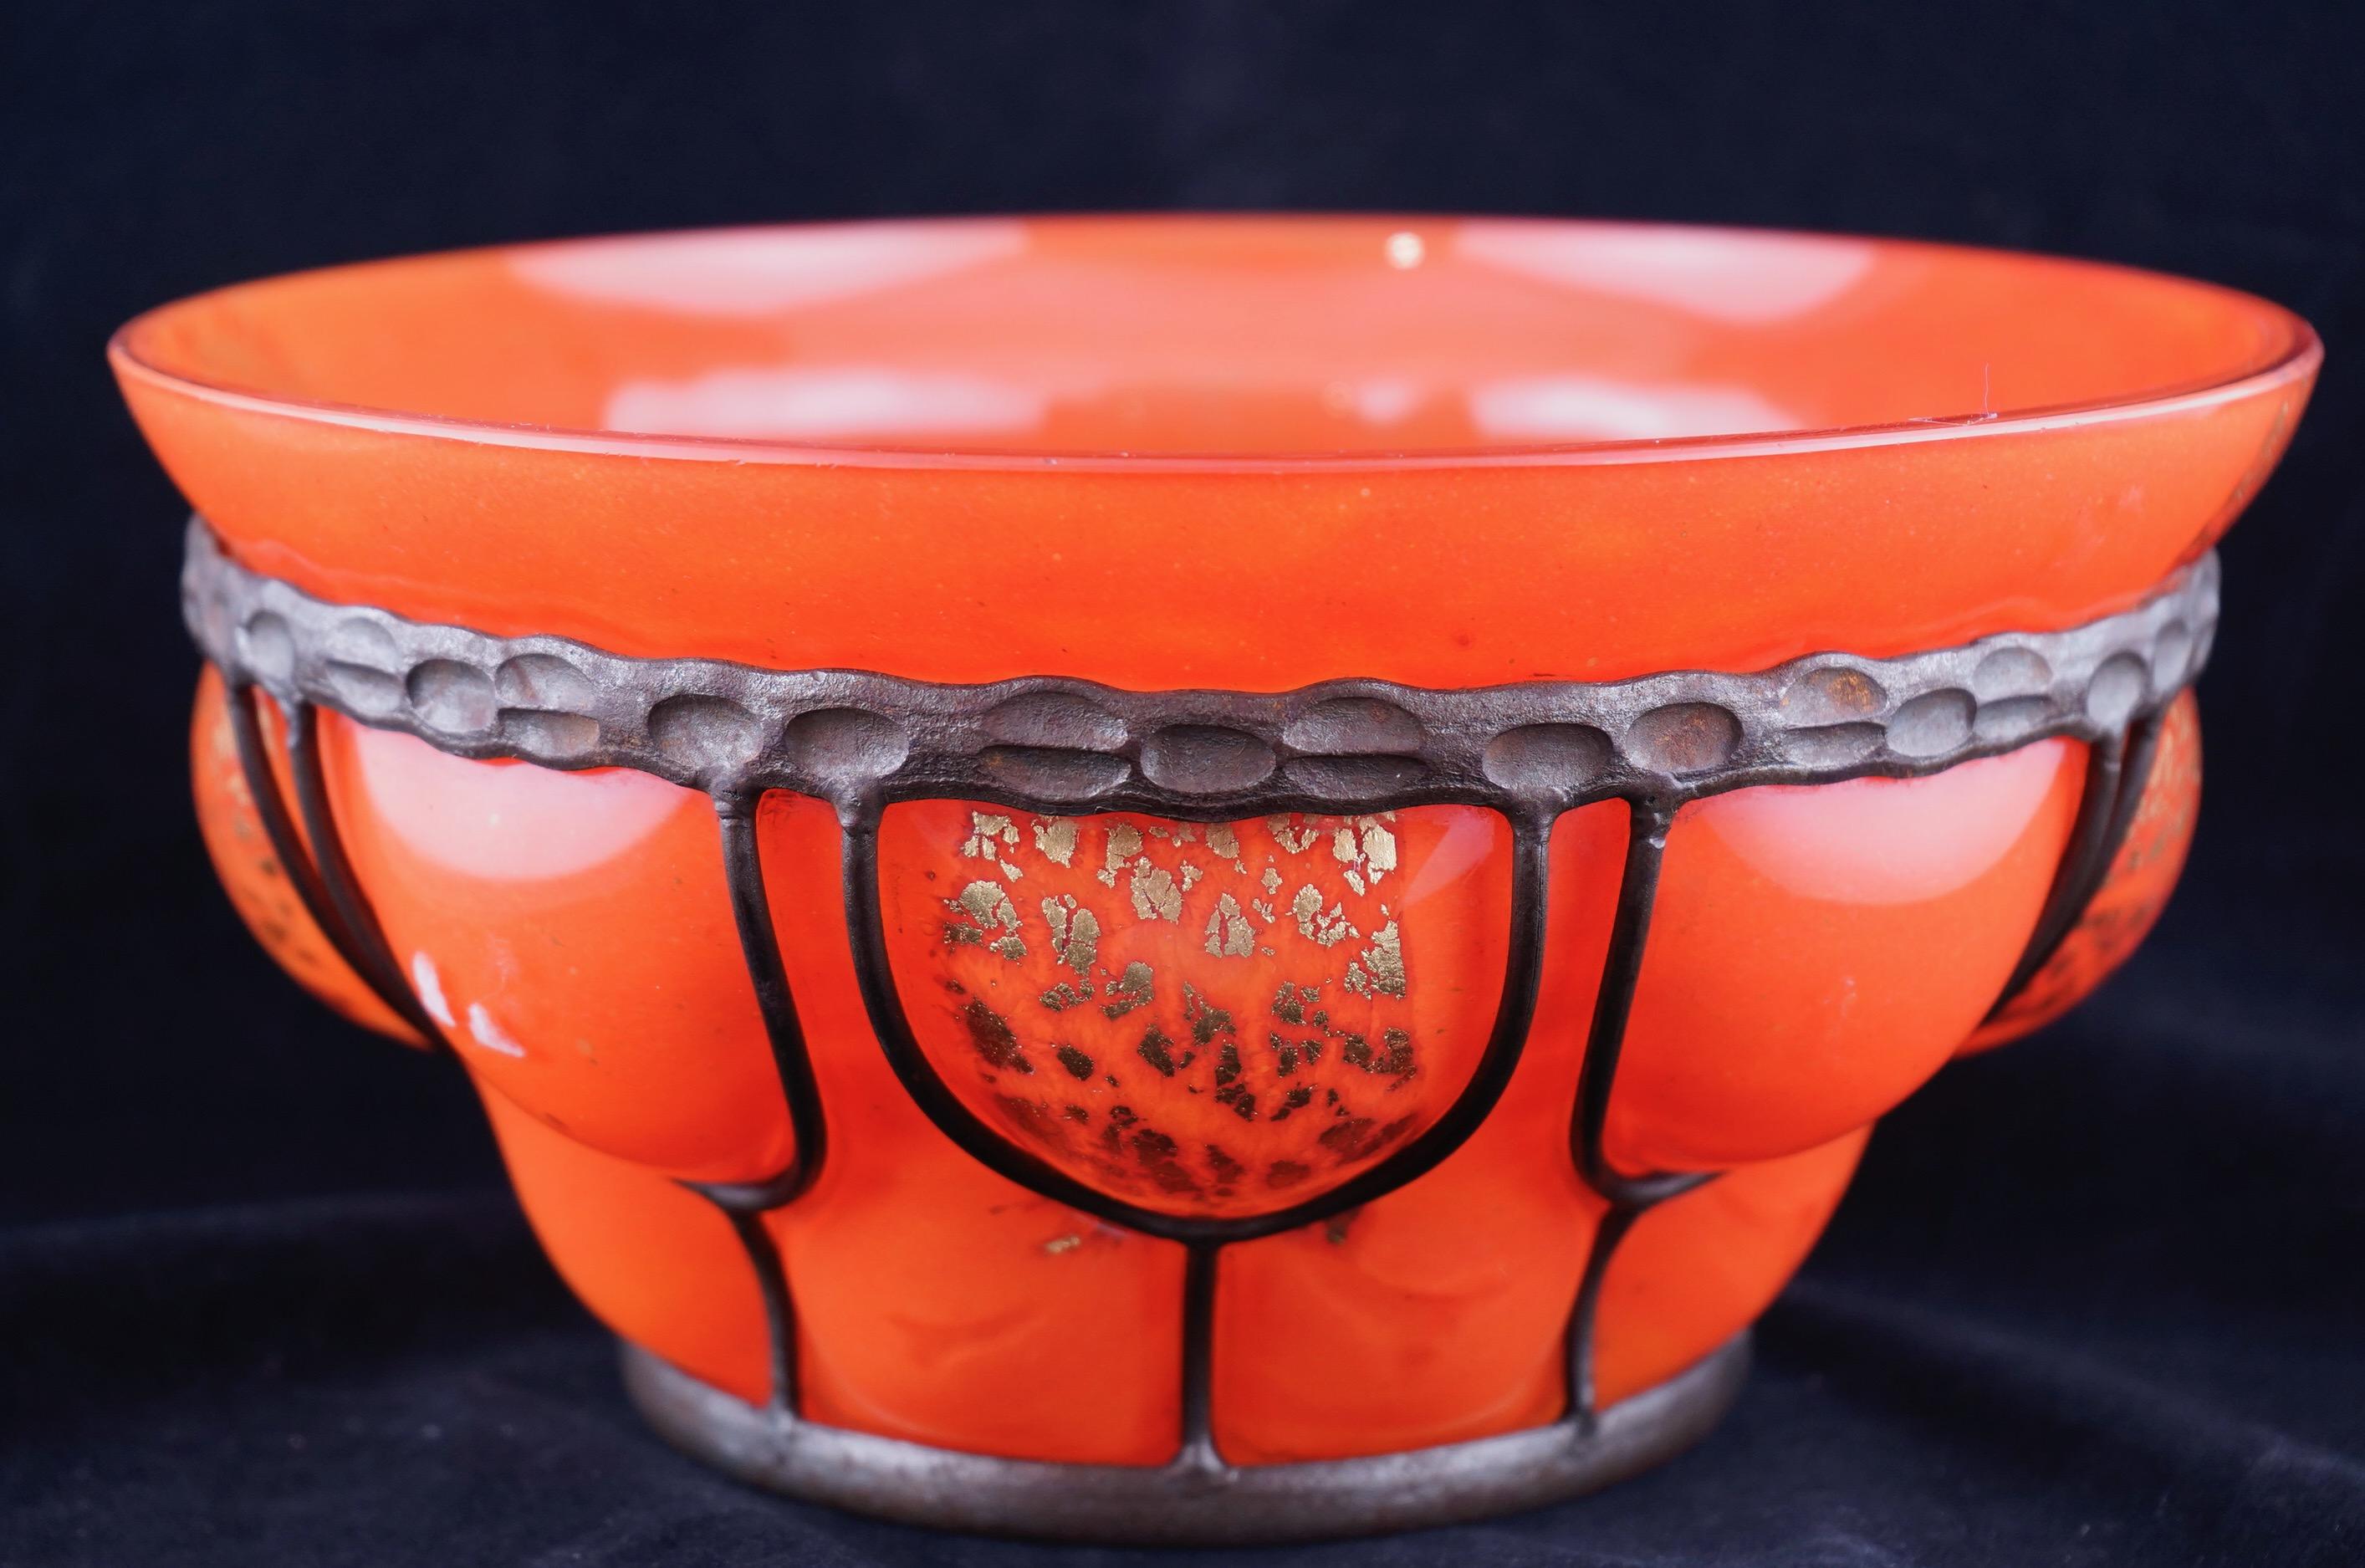 Daum and Majorelle glass bowl blown into a wrought iron frame. The glass is bright orange with gold foil inclusions. The bowl is engraved on the bottom with the makers' signatures.